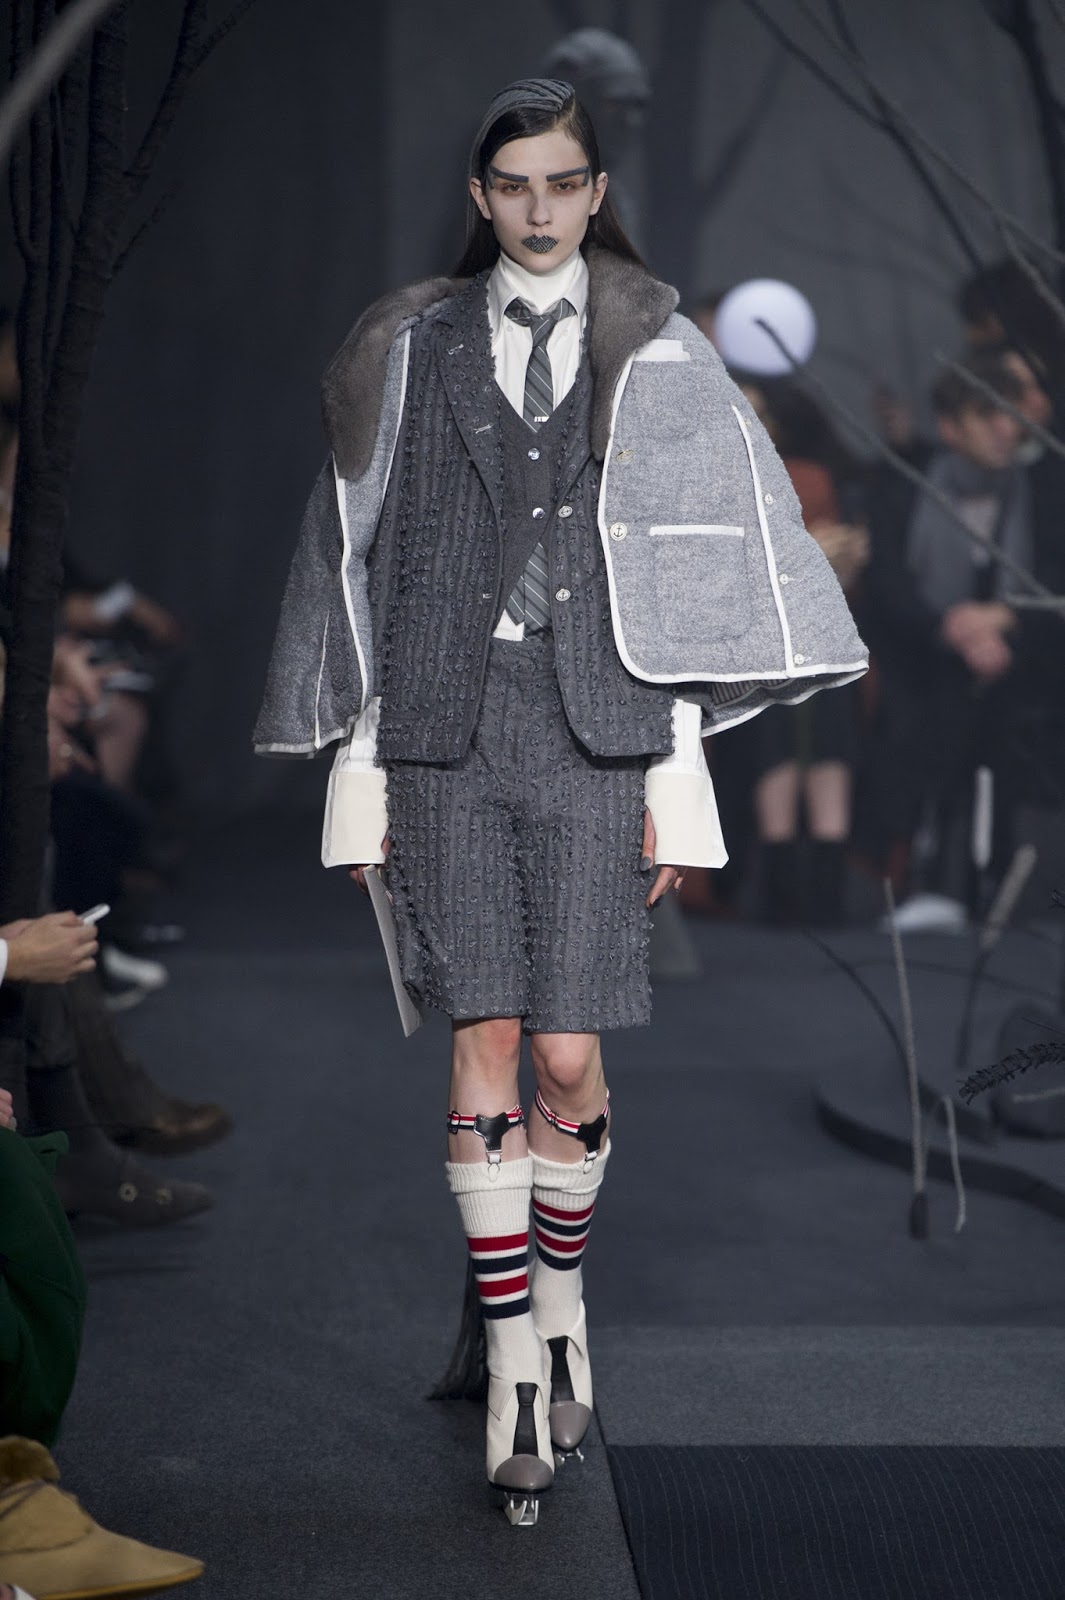 On another level:THOM BROWNE February 17, 2017 | ZsaZsa Bellagio - Like ...